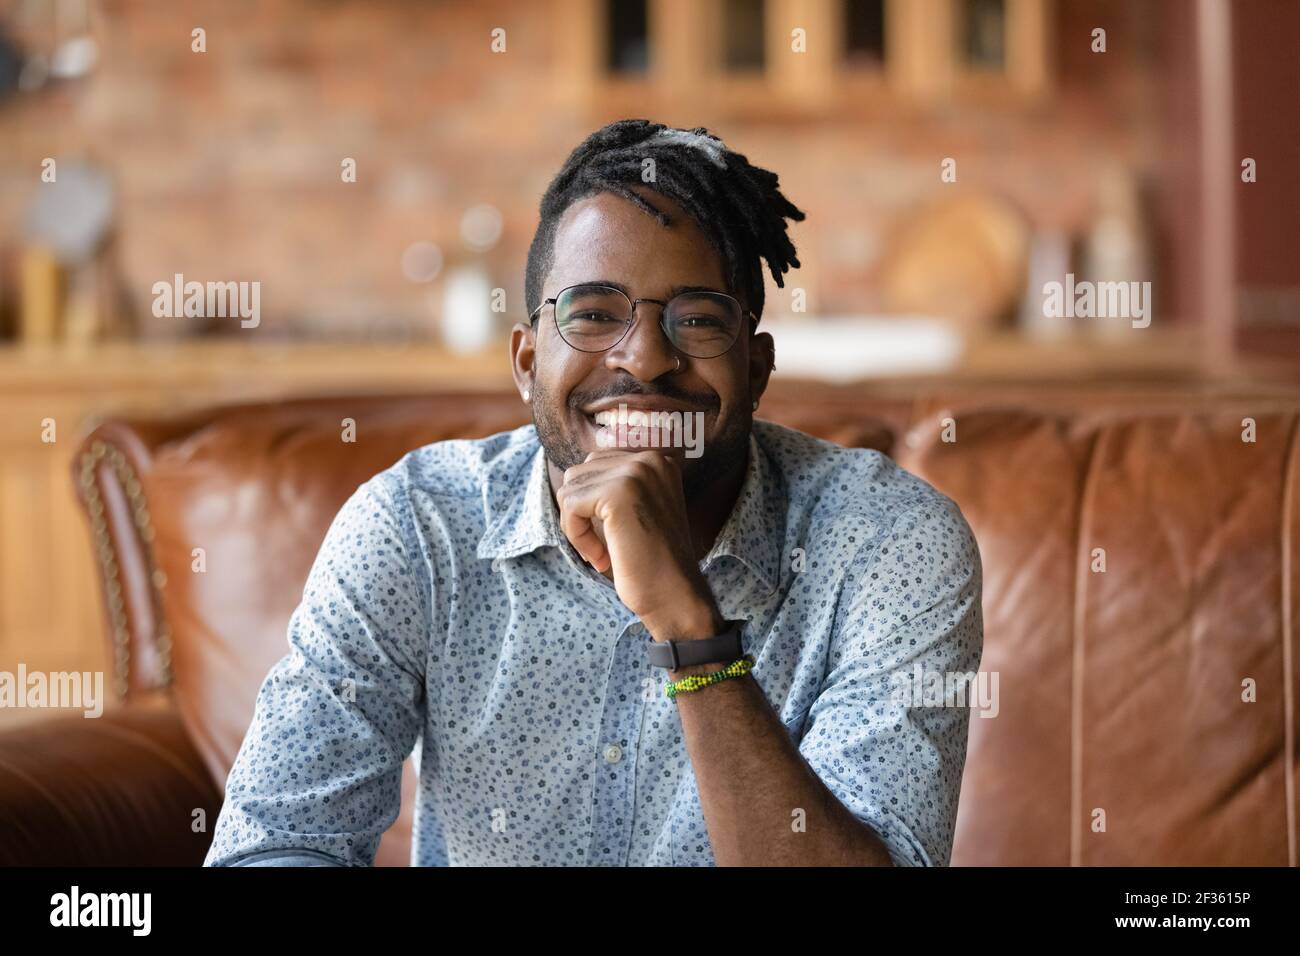 Smiling young black male sitting on sofa looking at camera Stock Photo